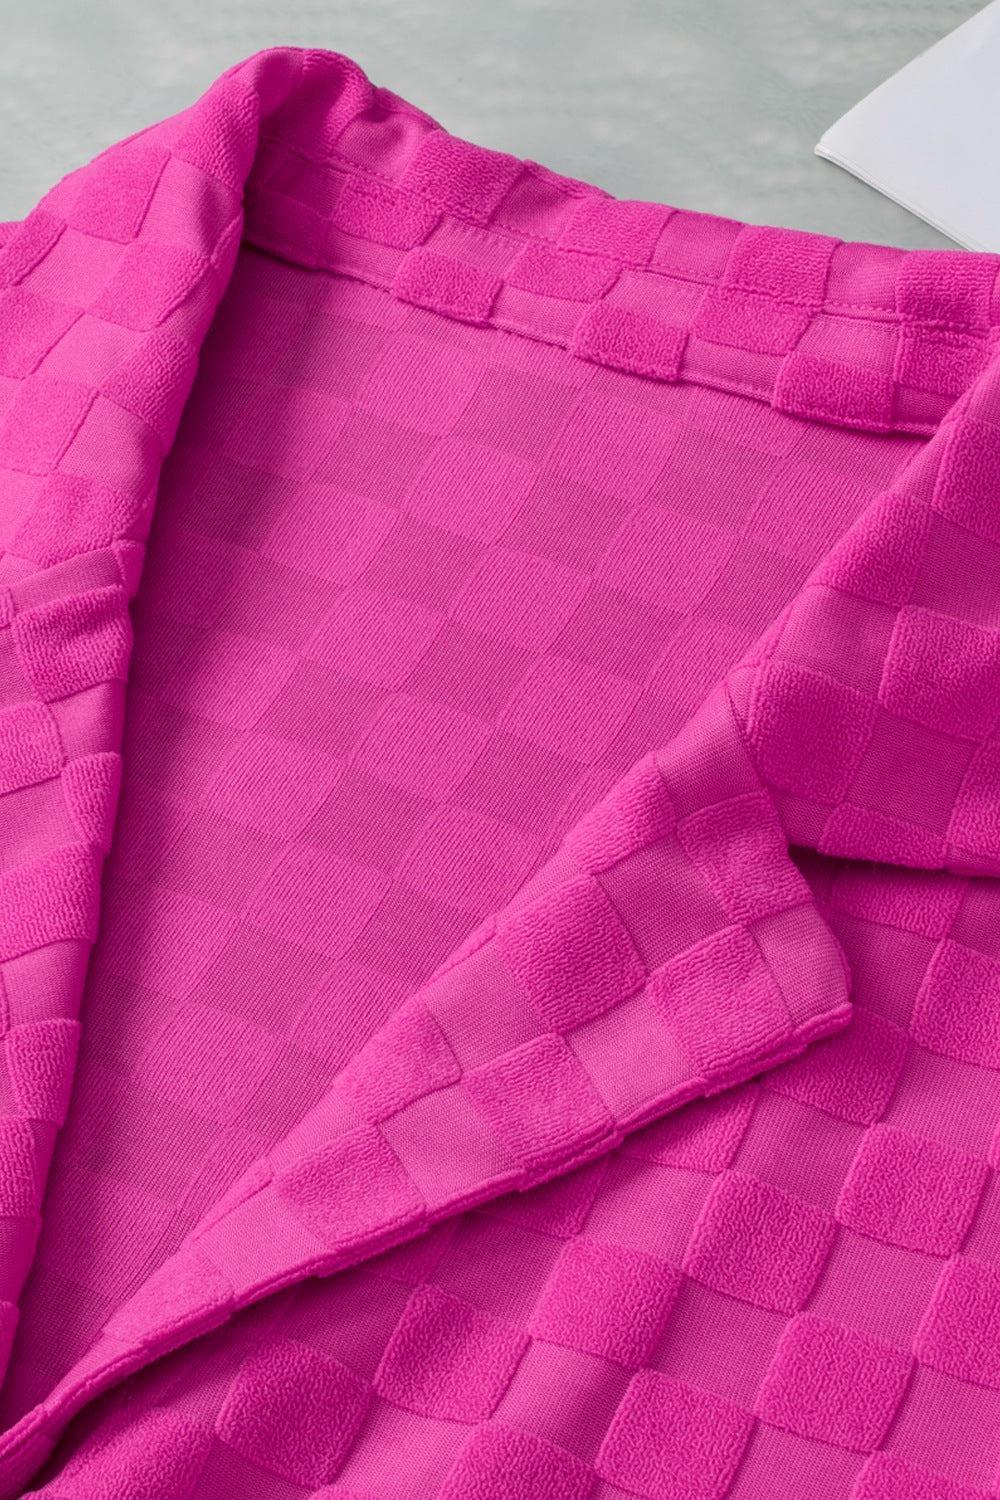 a close up of a pink shirt on a table